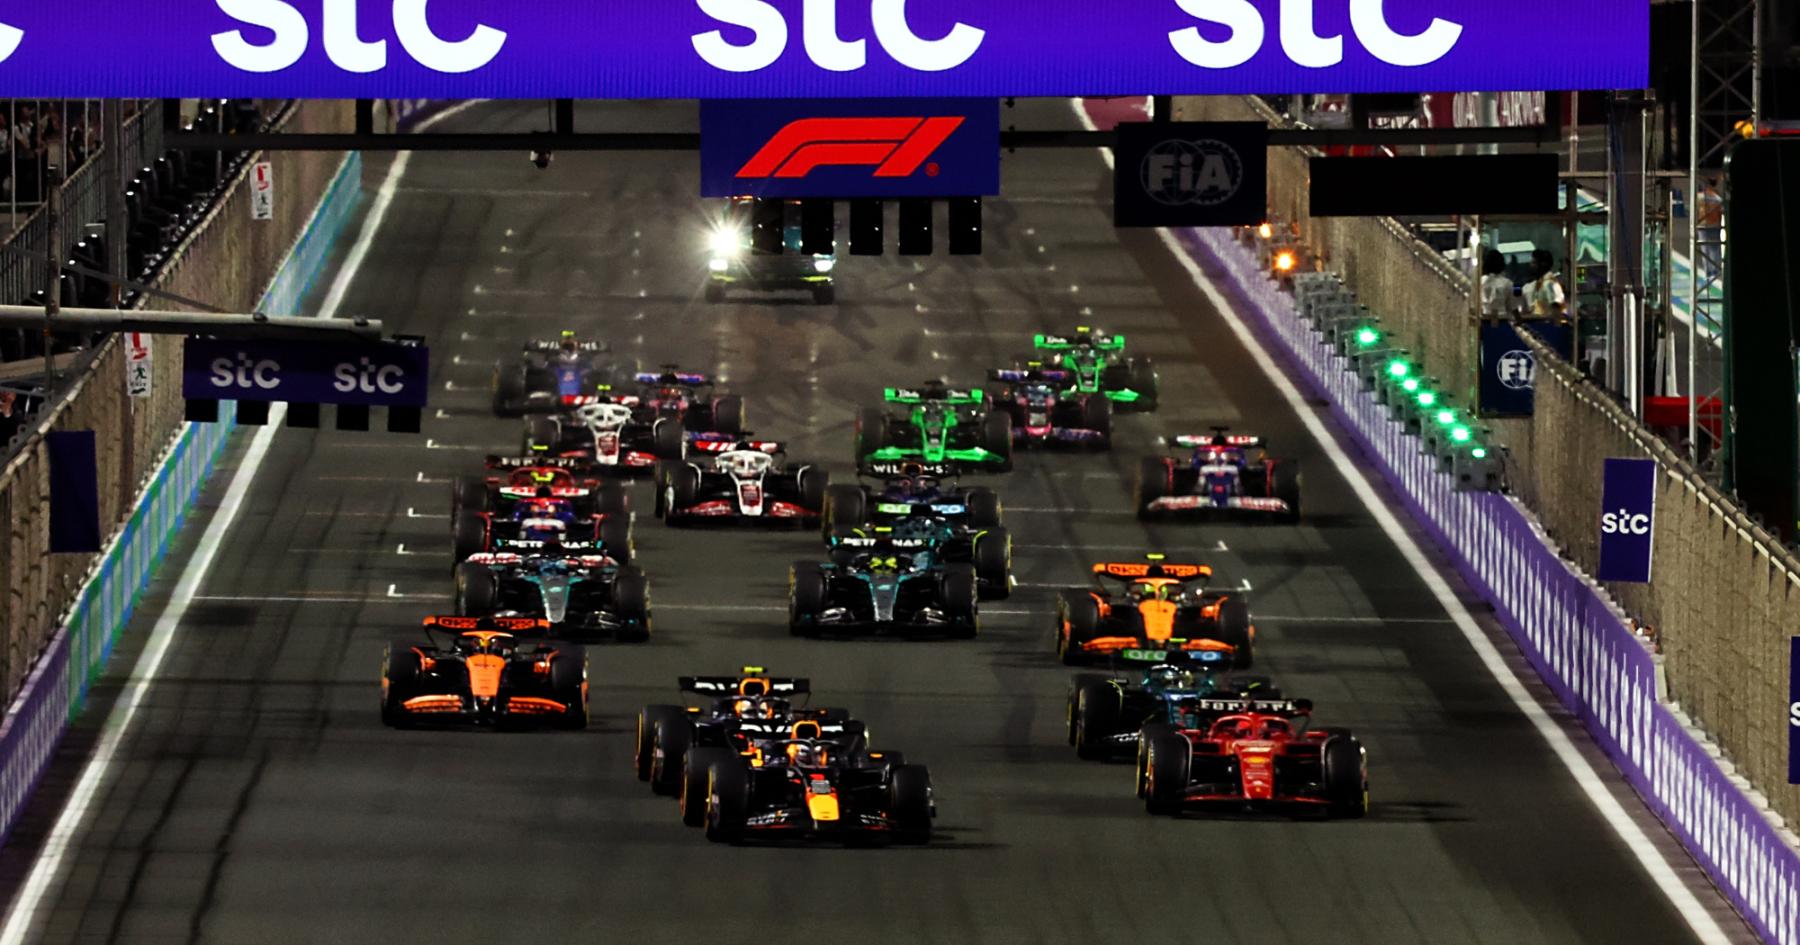 F1 Rivals Unite Against Unjust Accusations: Standing Strong in Defense